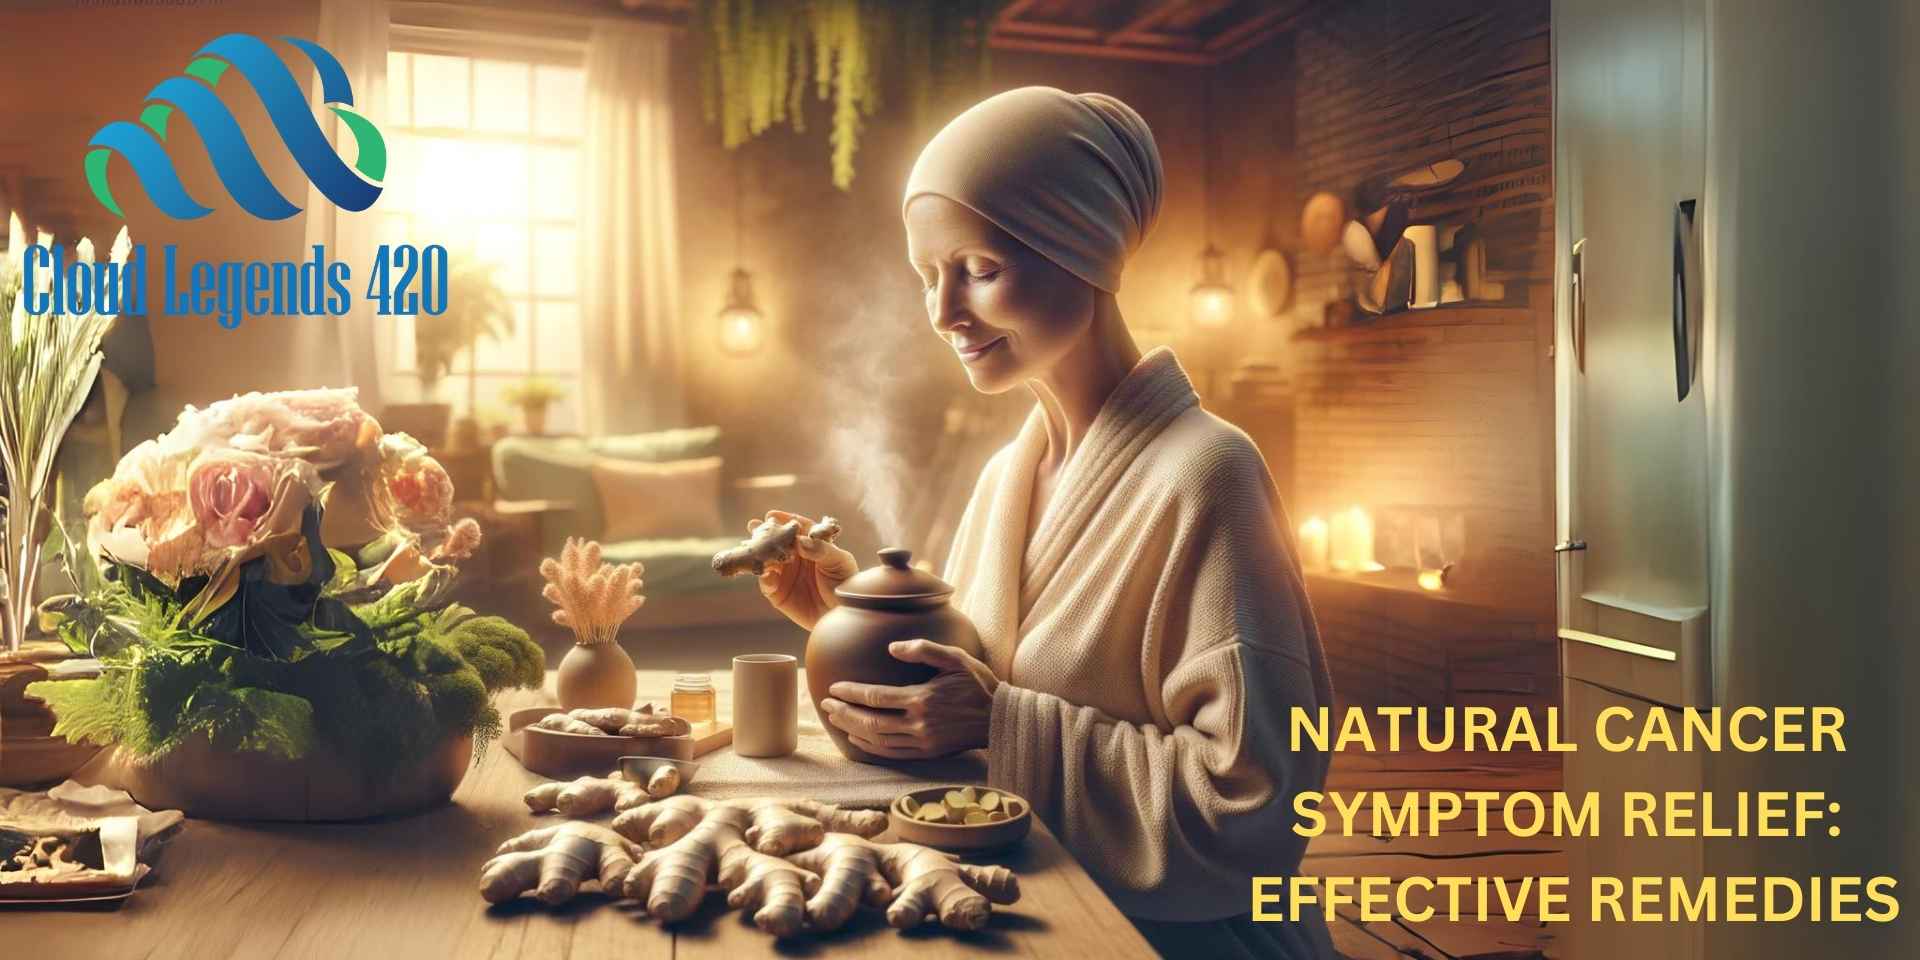 Natural Cancer Symptom Relief: Effective Remedies banner by Cloud Legends 420